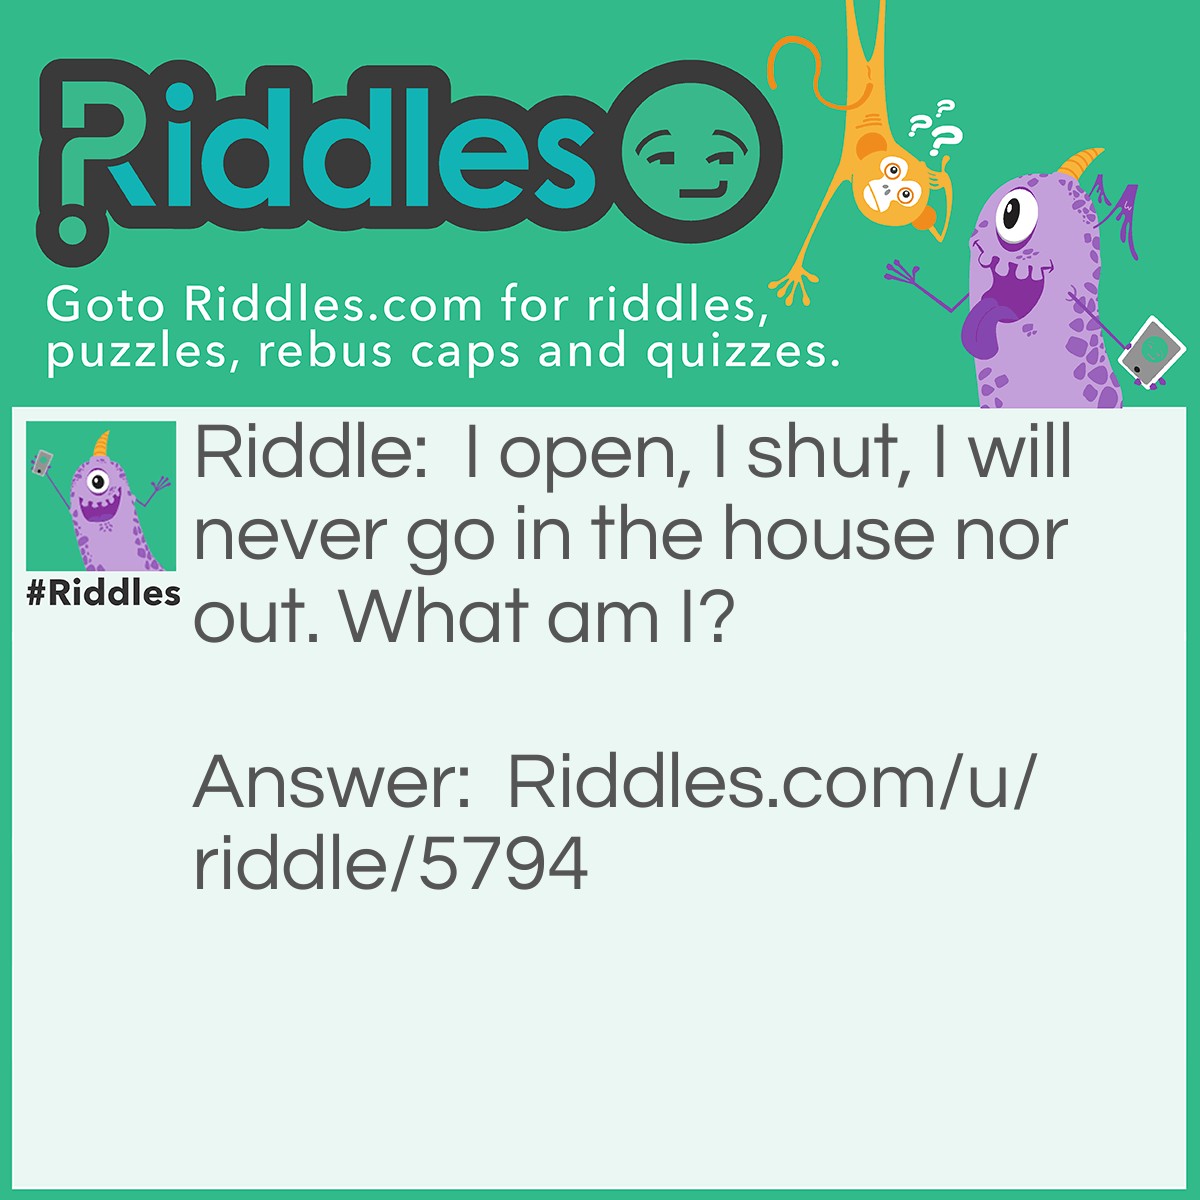 Riddle: I open, I shut, I will never go in the house nor out. What am I? Answer: A door.